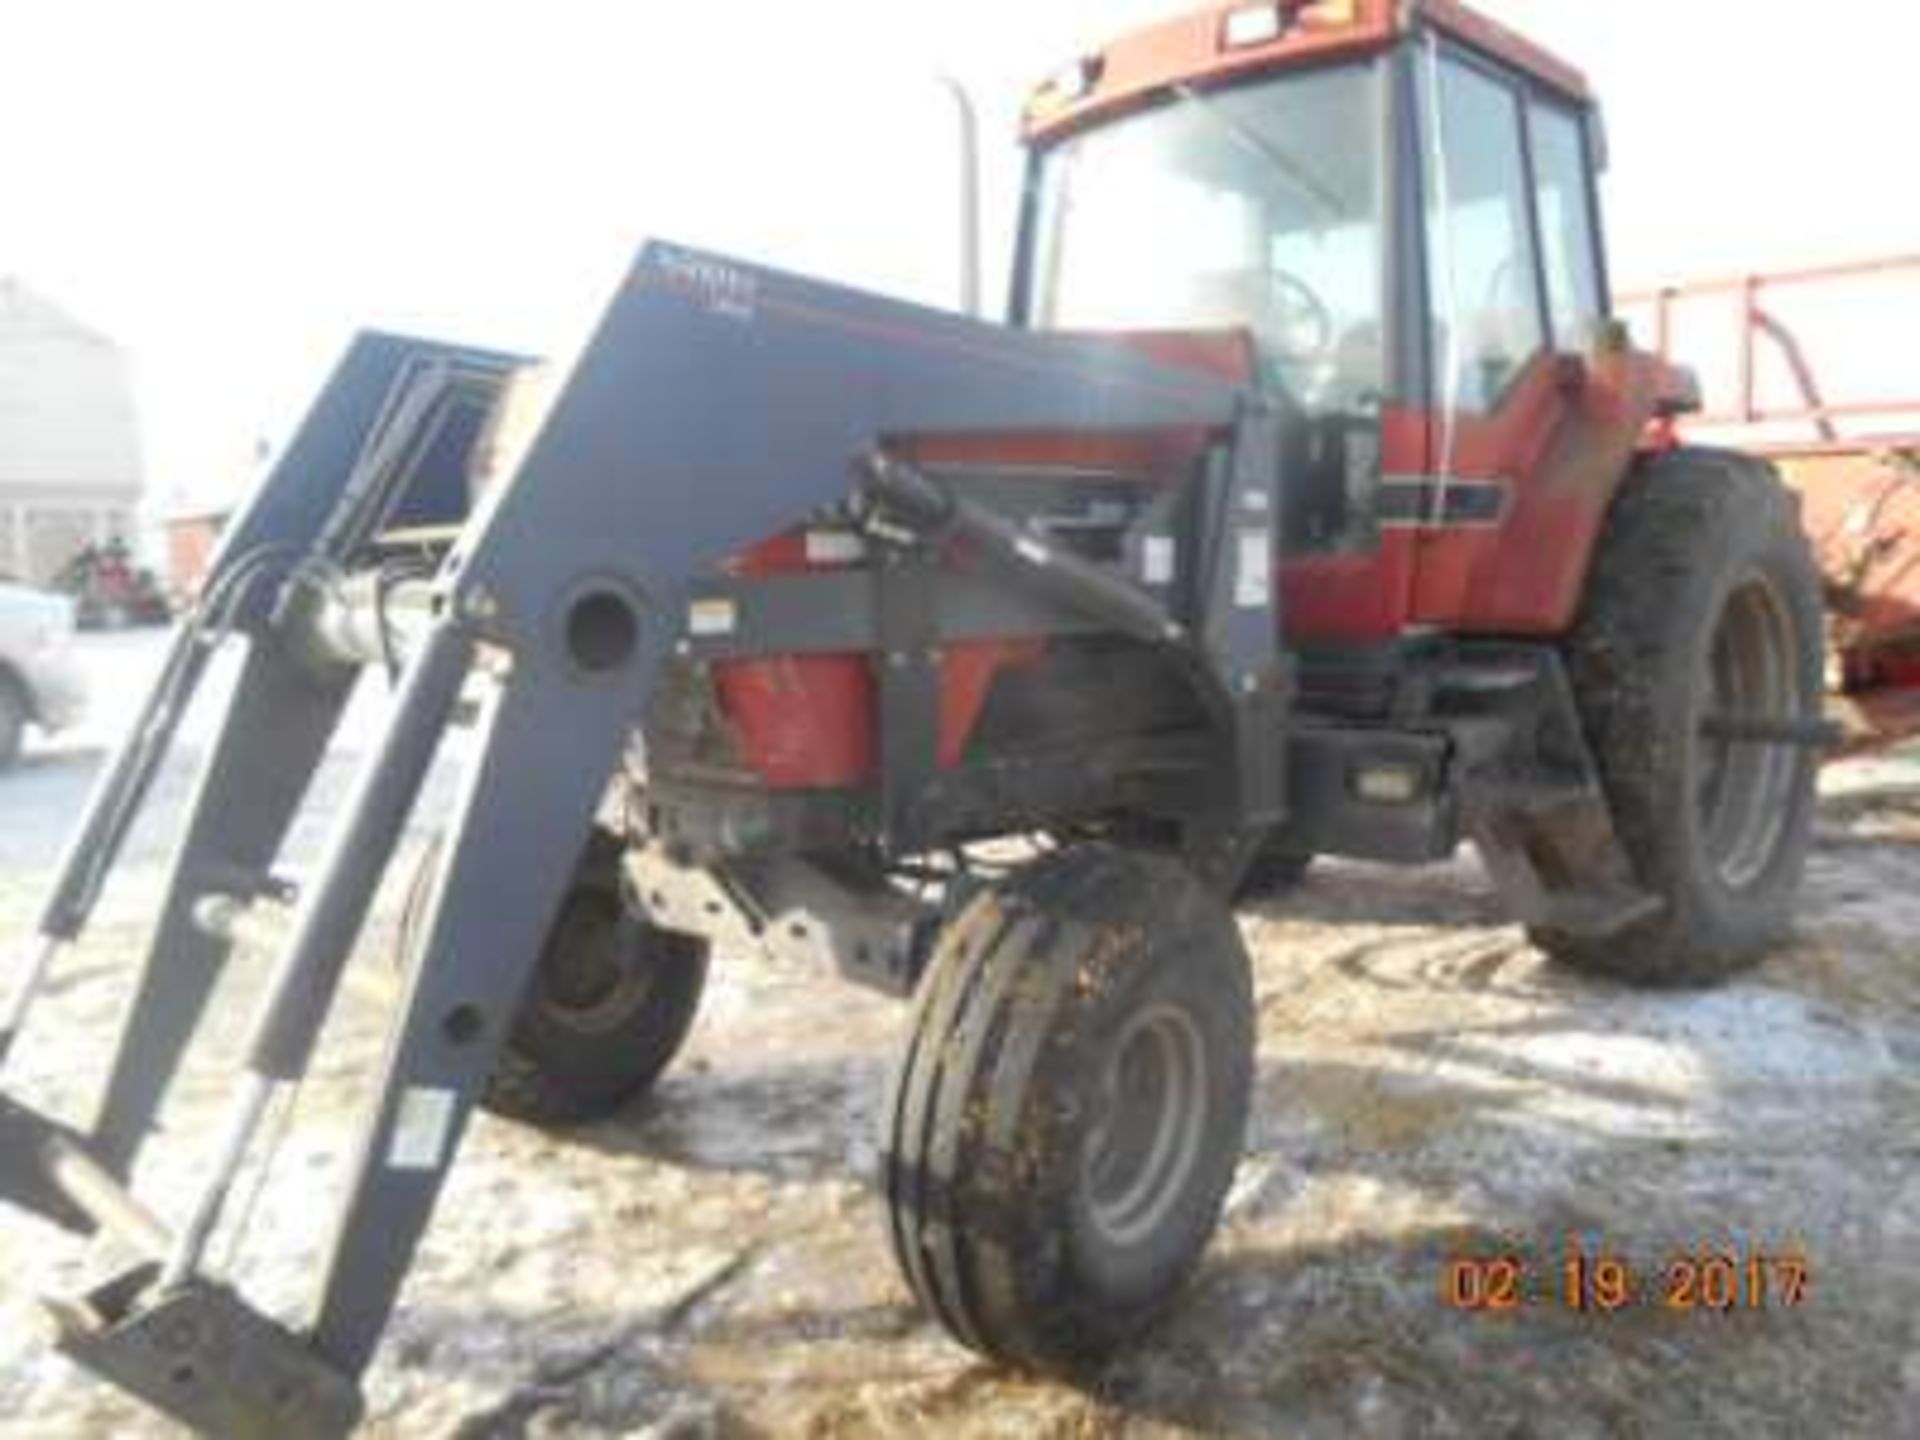 Case INT 7110 tractor, power shift, 8978hrs, 20.8x38 tires,Buhler 795 FEL & Grapple fork, bale